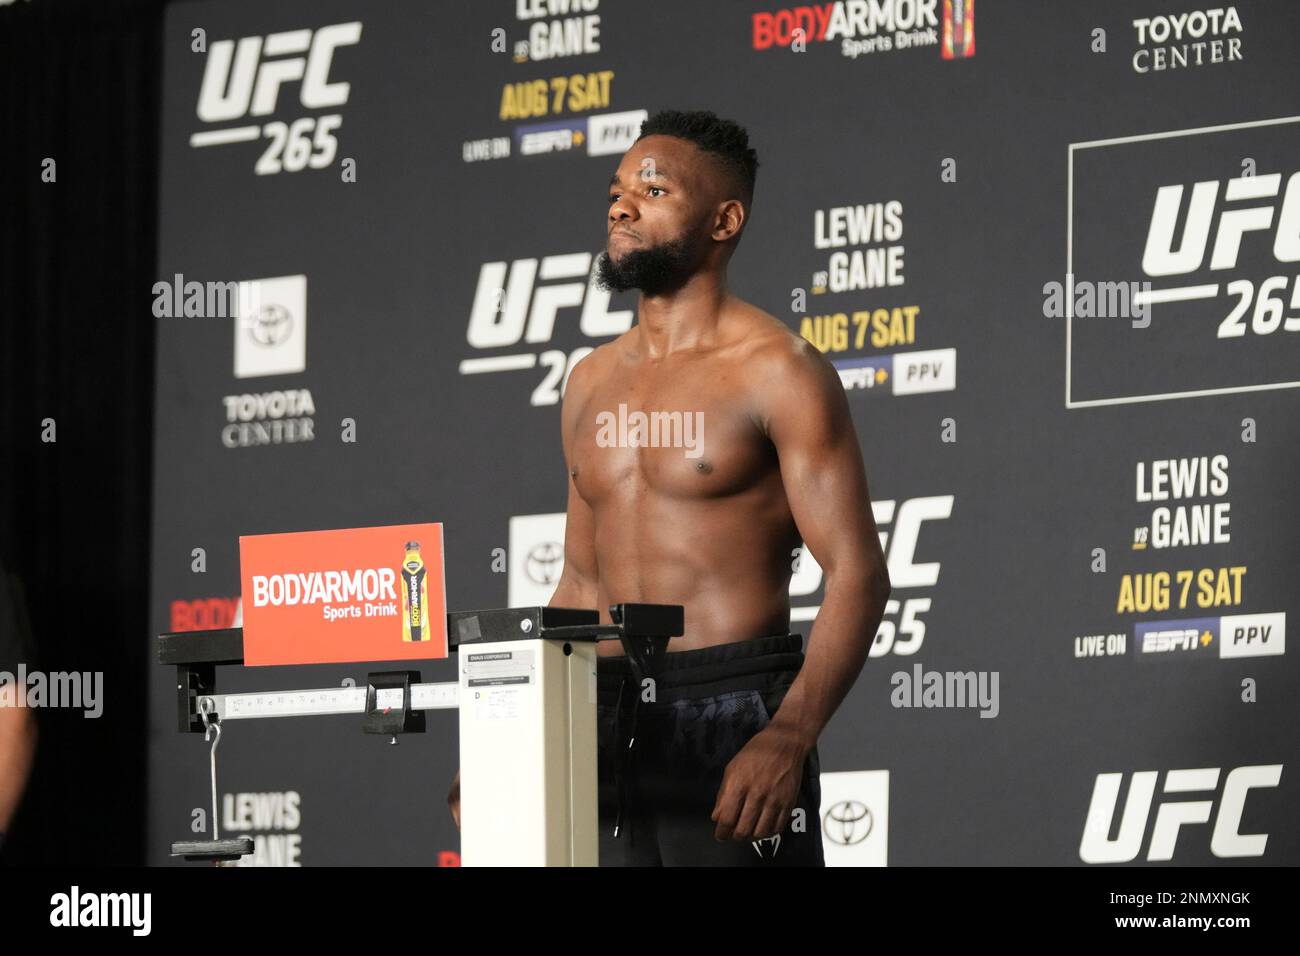 HOUSTON, TX - AUGUST 06: Manel Kape steps on the scale during the official  weigh-in for UFC 265 on August, 06, 2021, at Hyatt Regency in Houston, TX.  (Photo by Louis Grasse/PxImages/Icon